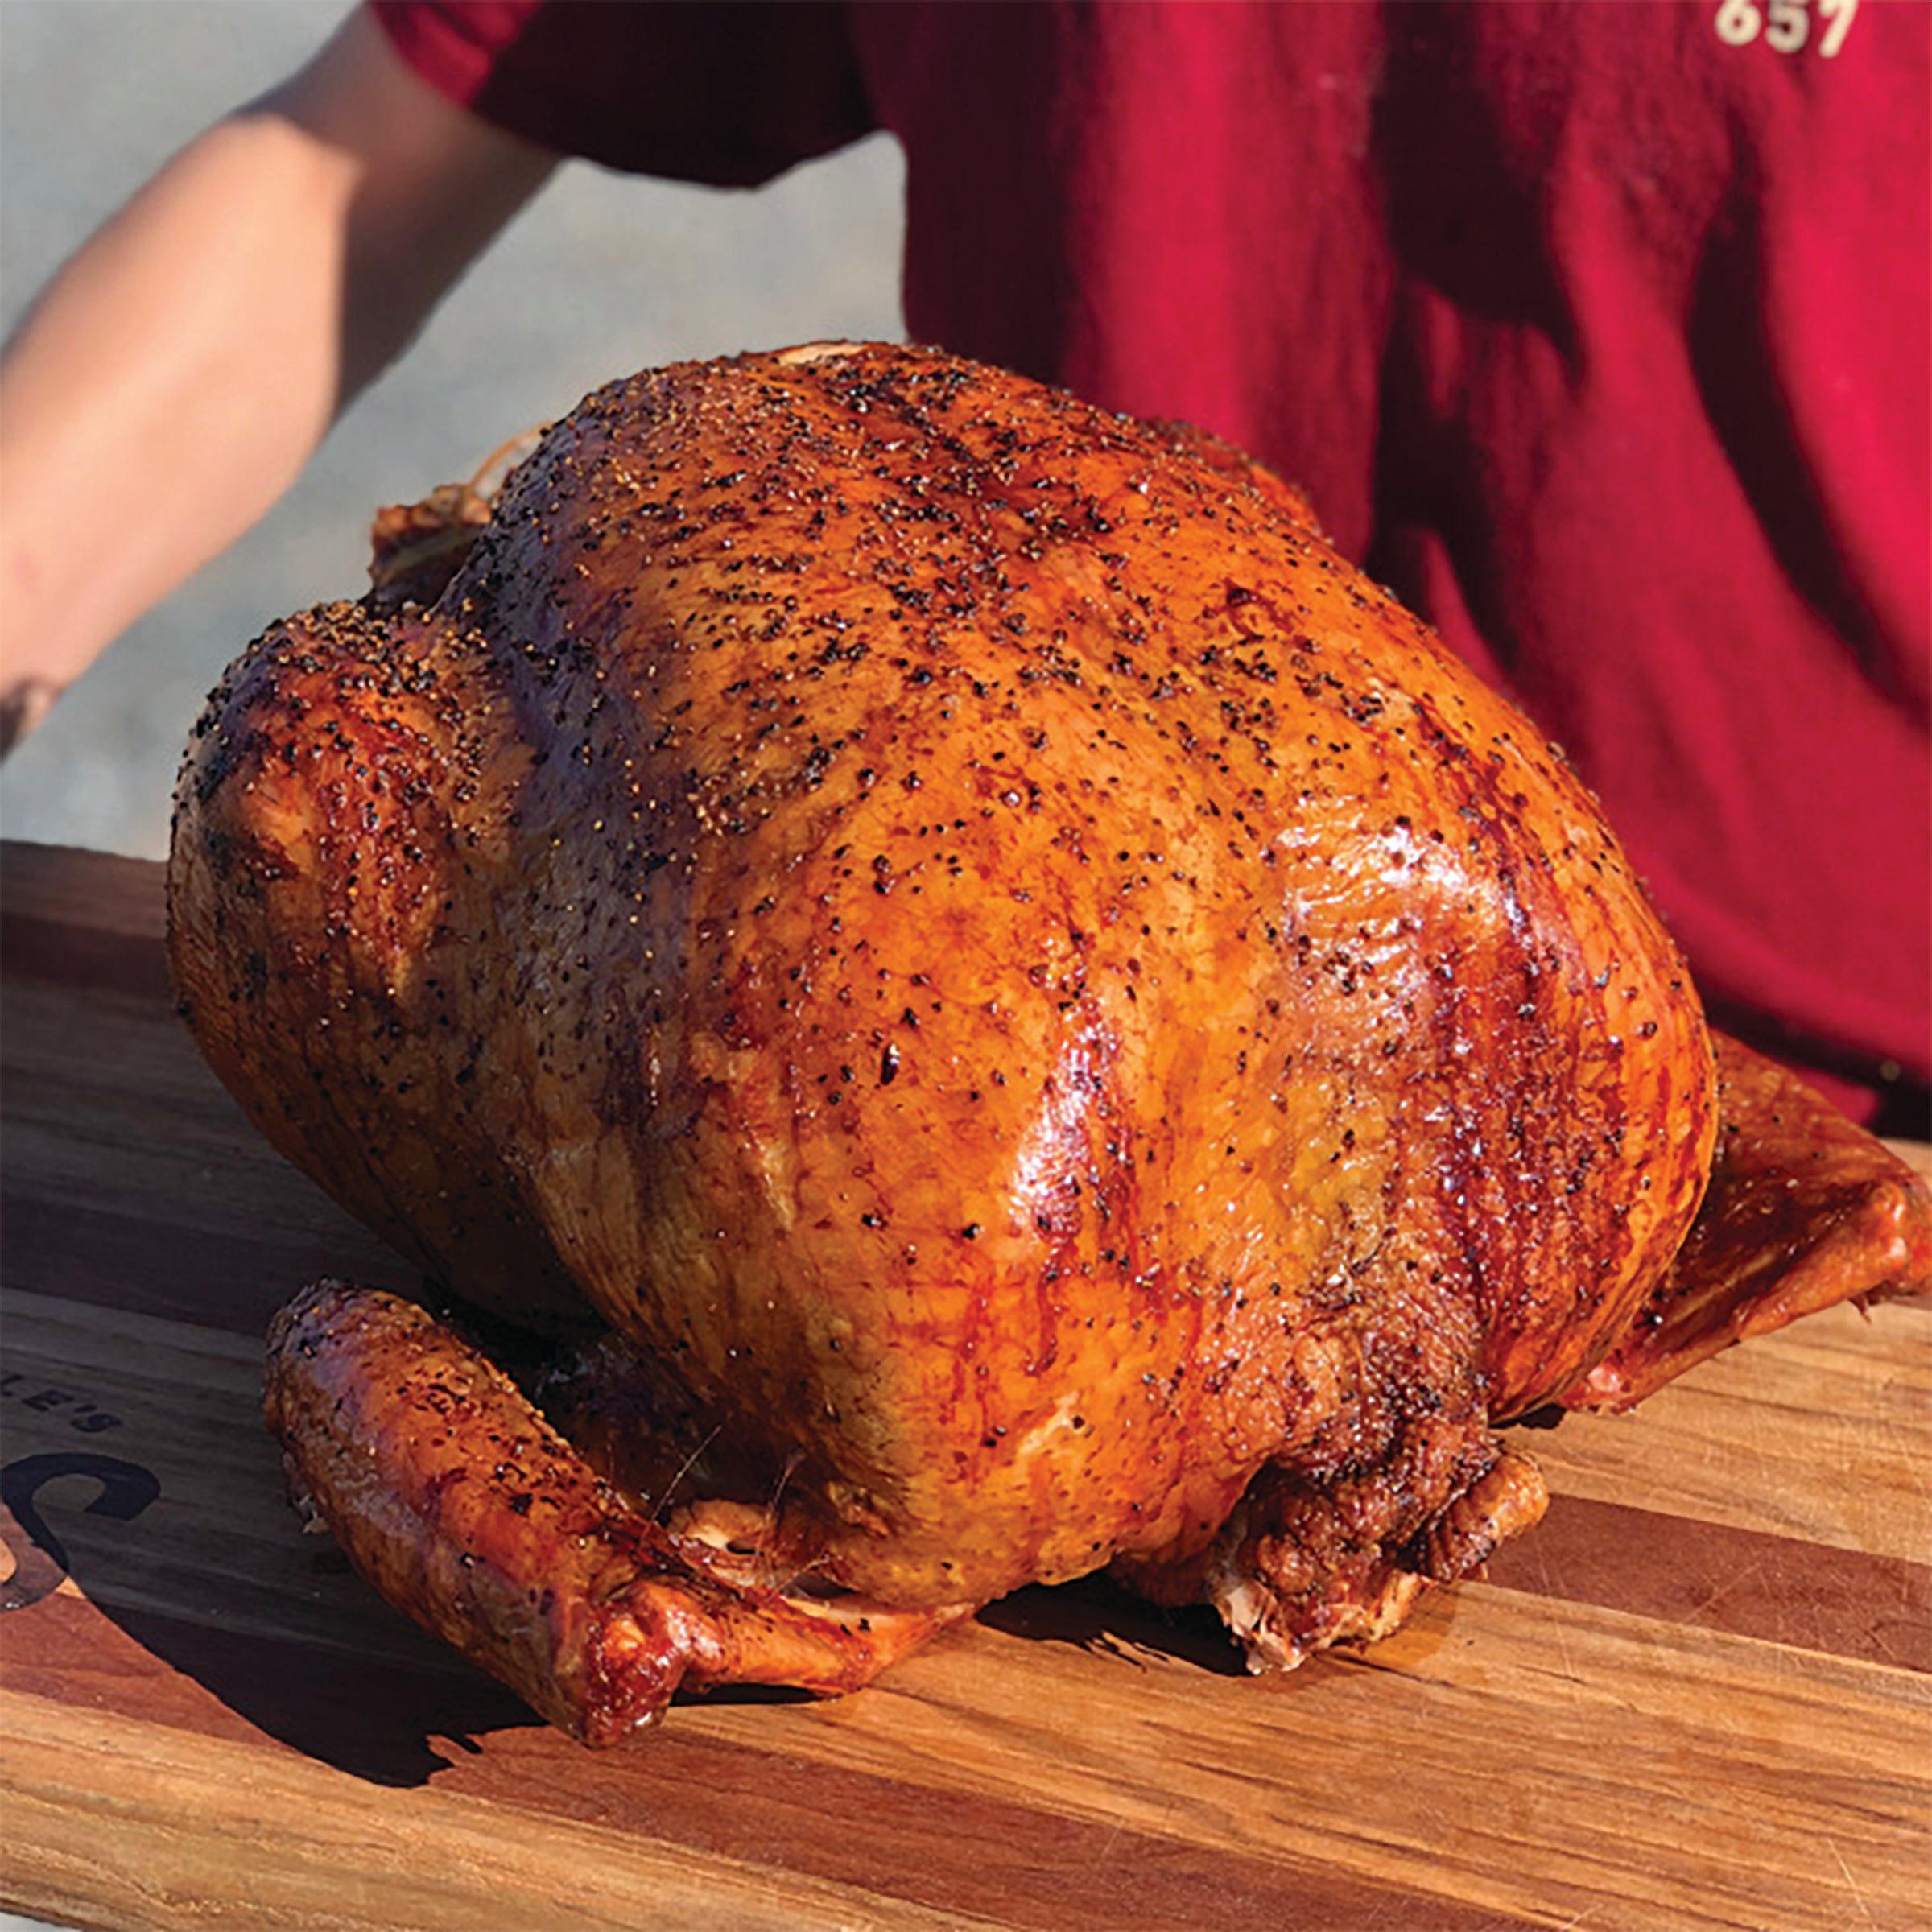 Fully Cooked Smoked Turkey_Roots 657_Prepared Meats